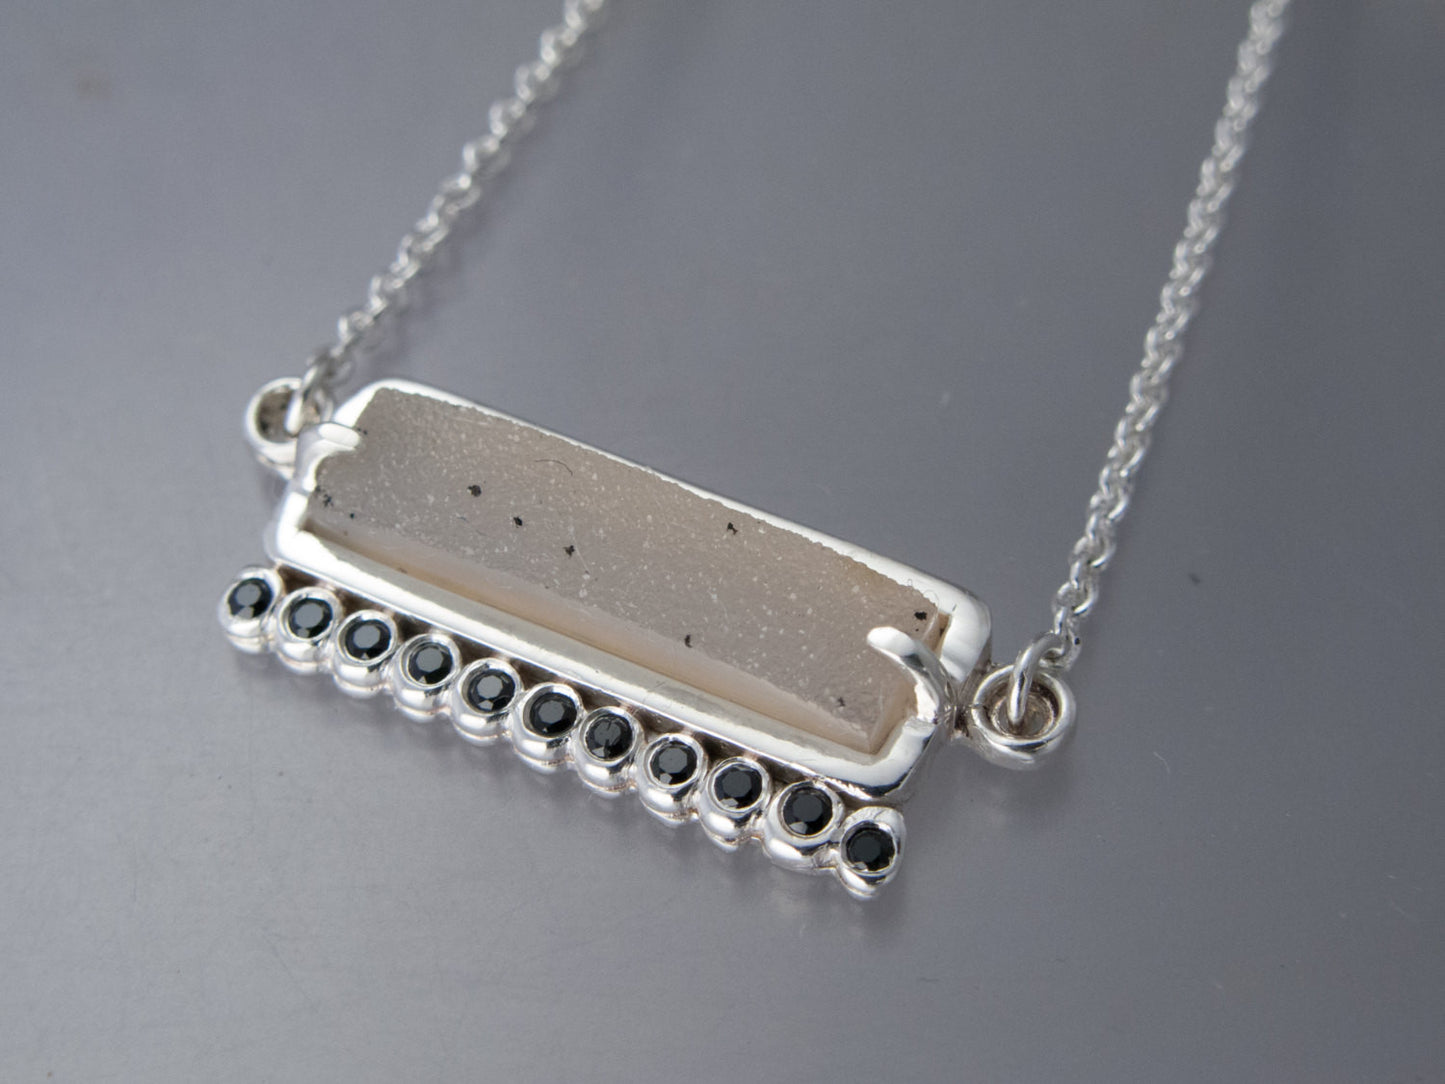 Drusy Agate and Back Spinel Necklace in Sterling Silver